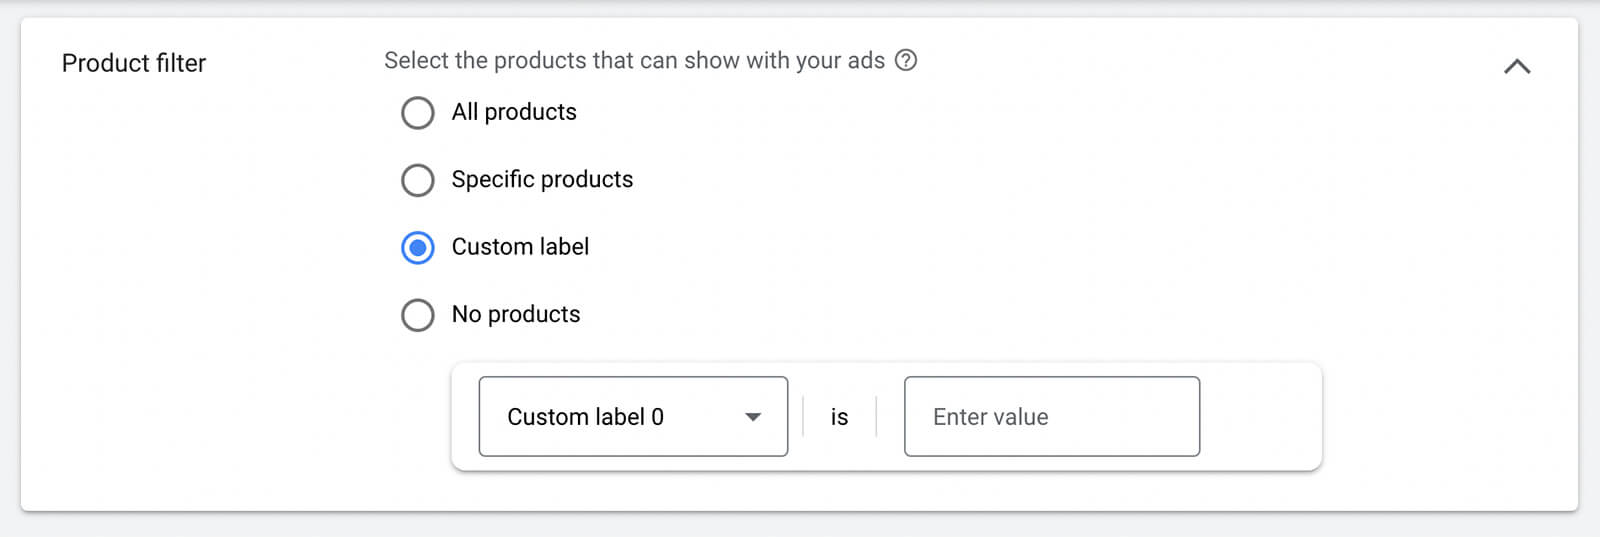 how-to-configure-the-product-feed-using-youtube-shorts-ads-product-filter-dropdown-all-specific-products-custom-label-no-products-example-15